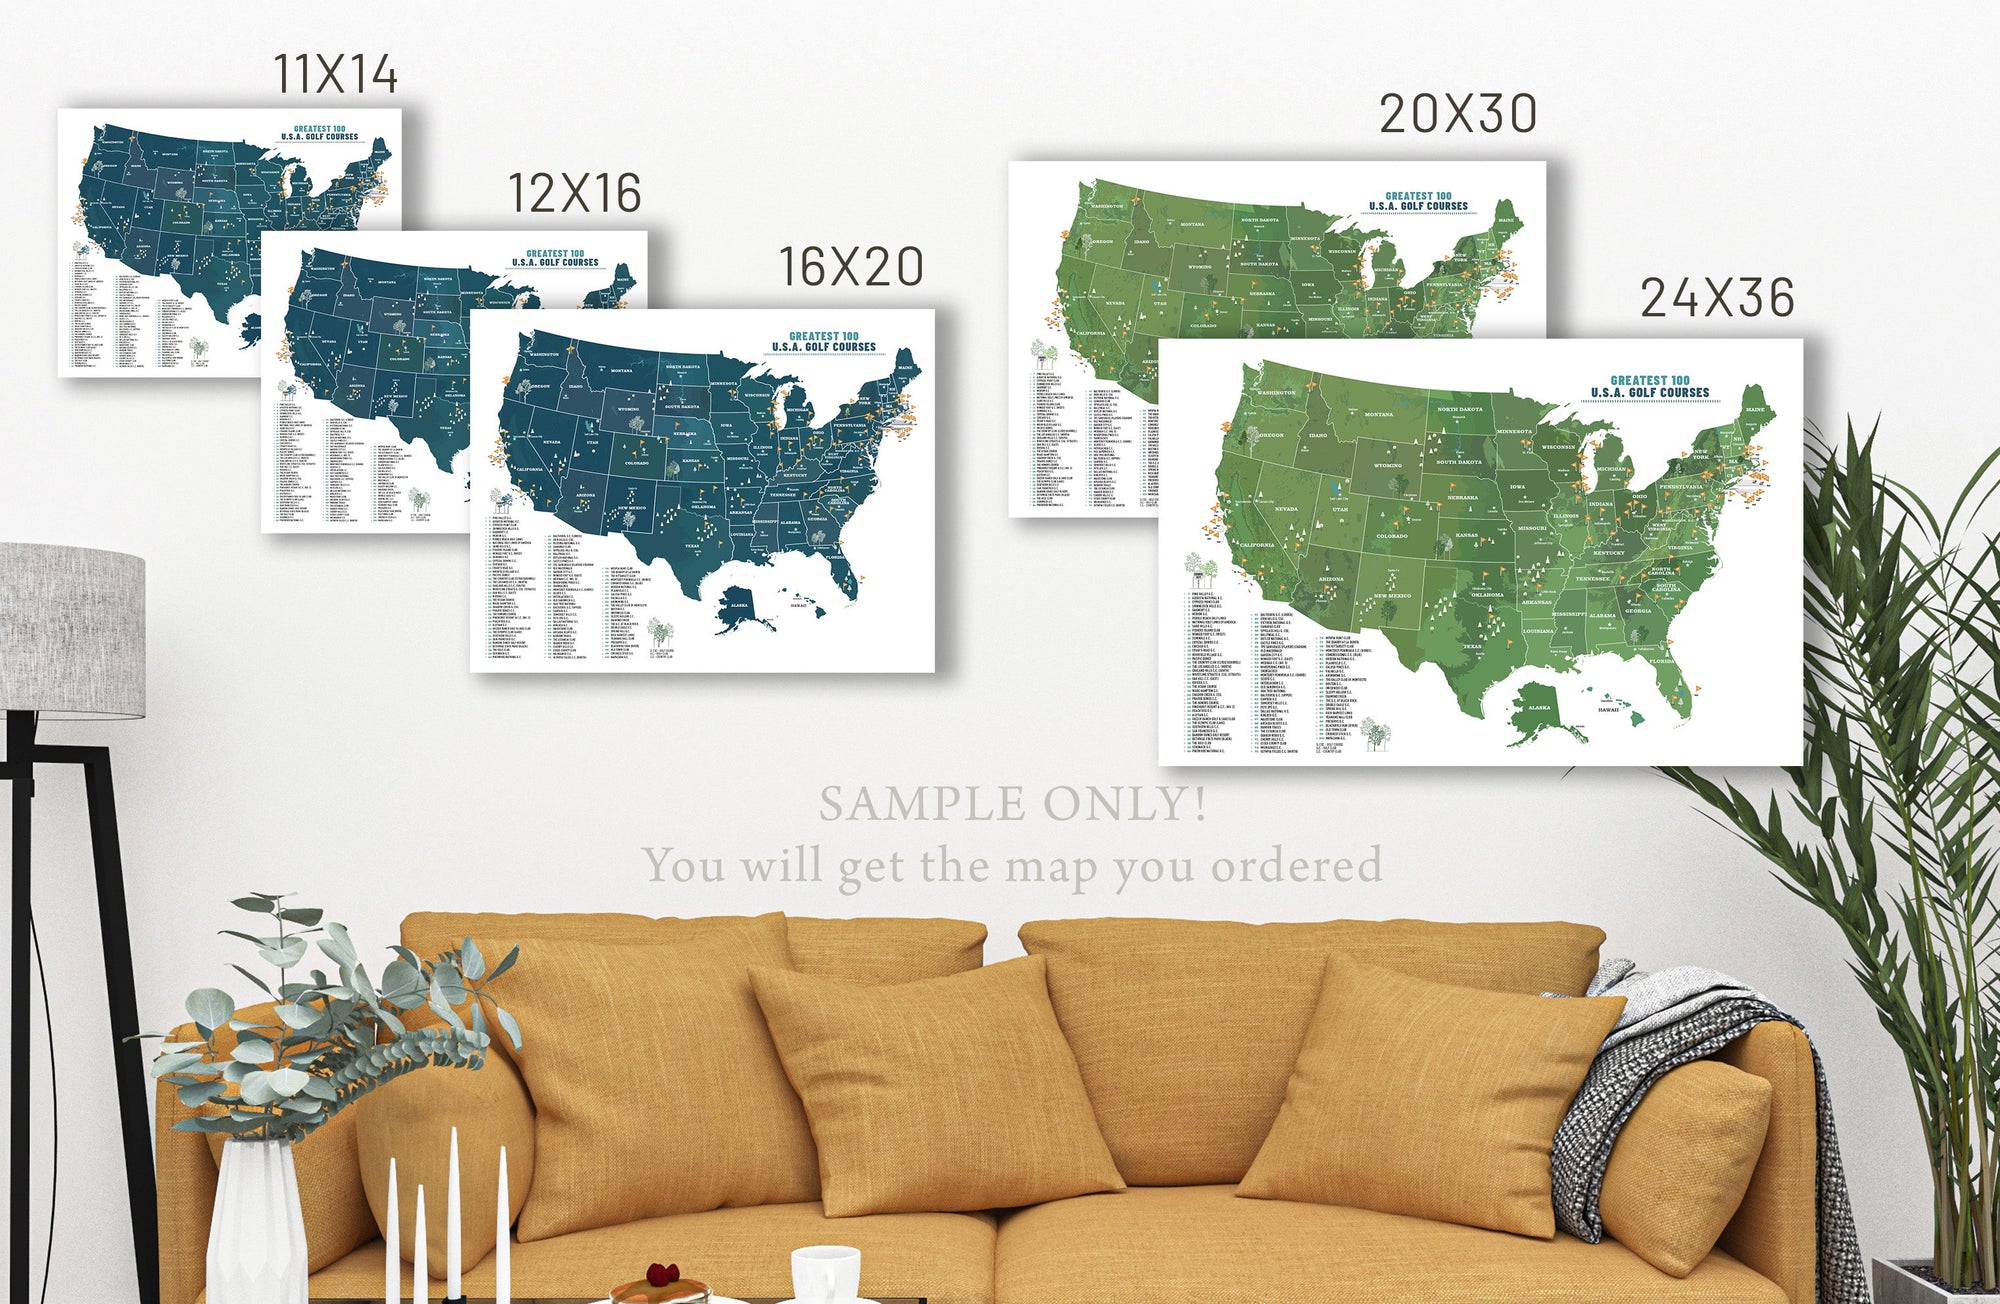 Top 100 Golf Courses Poster, USA Greatest 100, Push Pin Option, FRAMED Map World Vibe Studio 